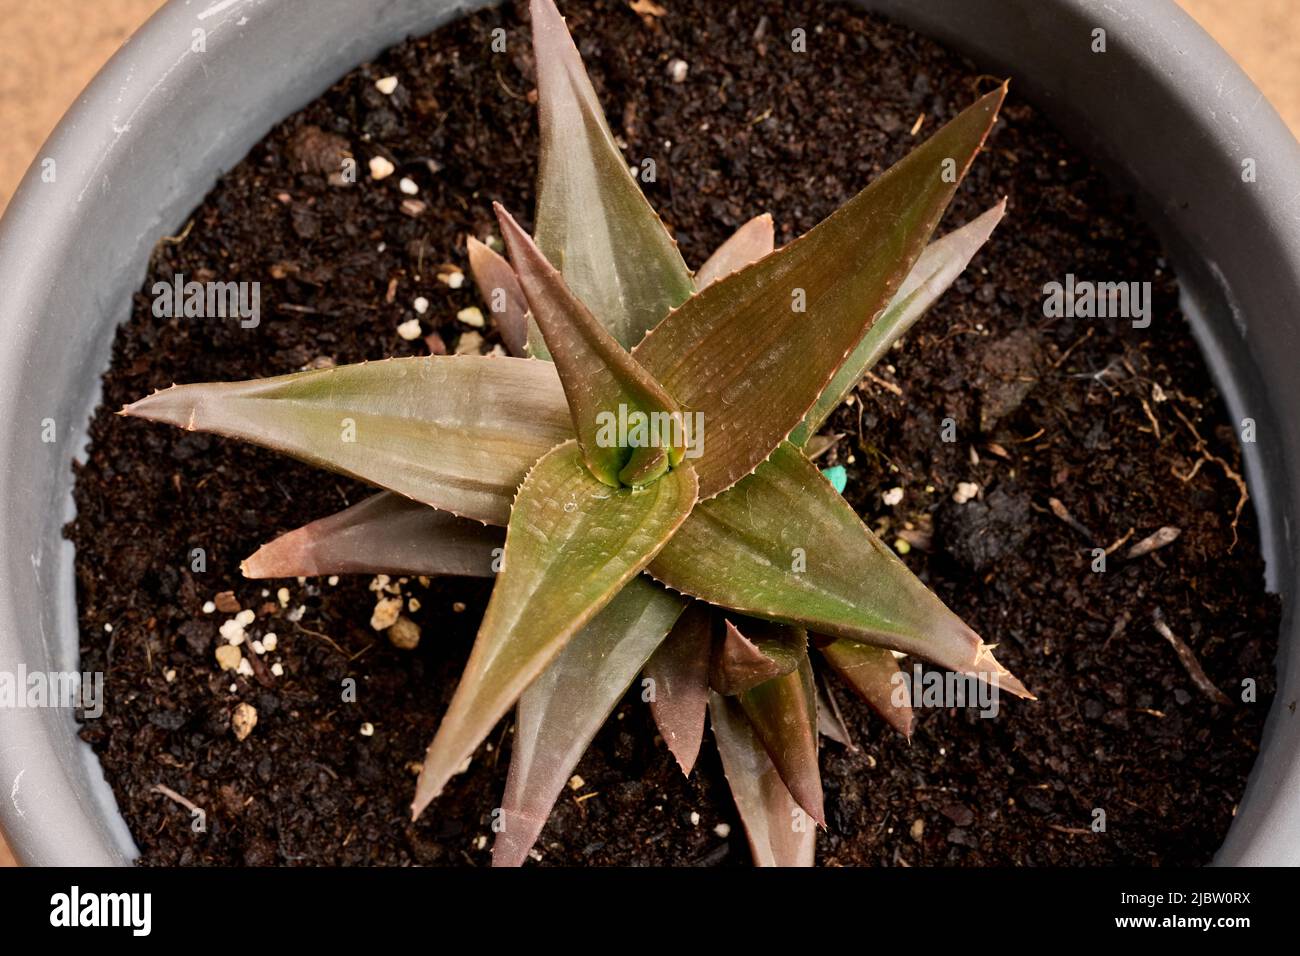 Top view of a succulent plant, Astroloba of the Xanthorrhoeacea family Stock Photo